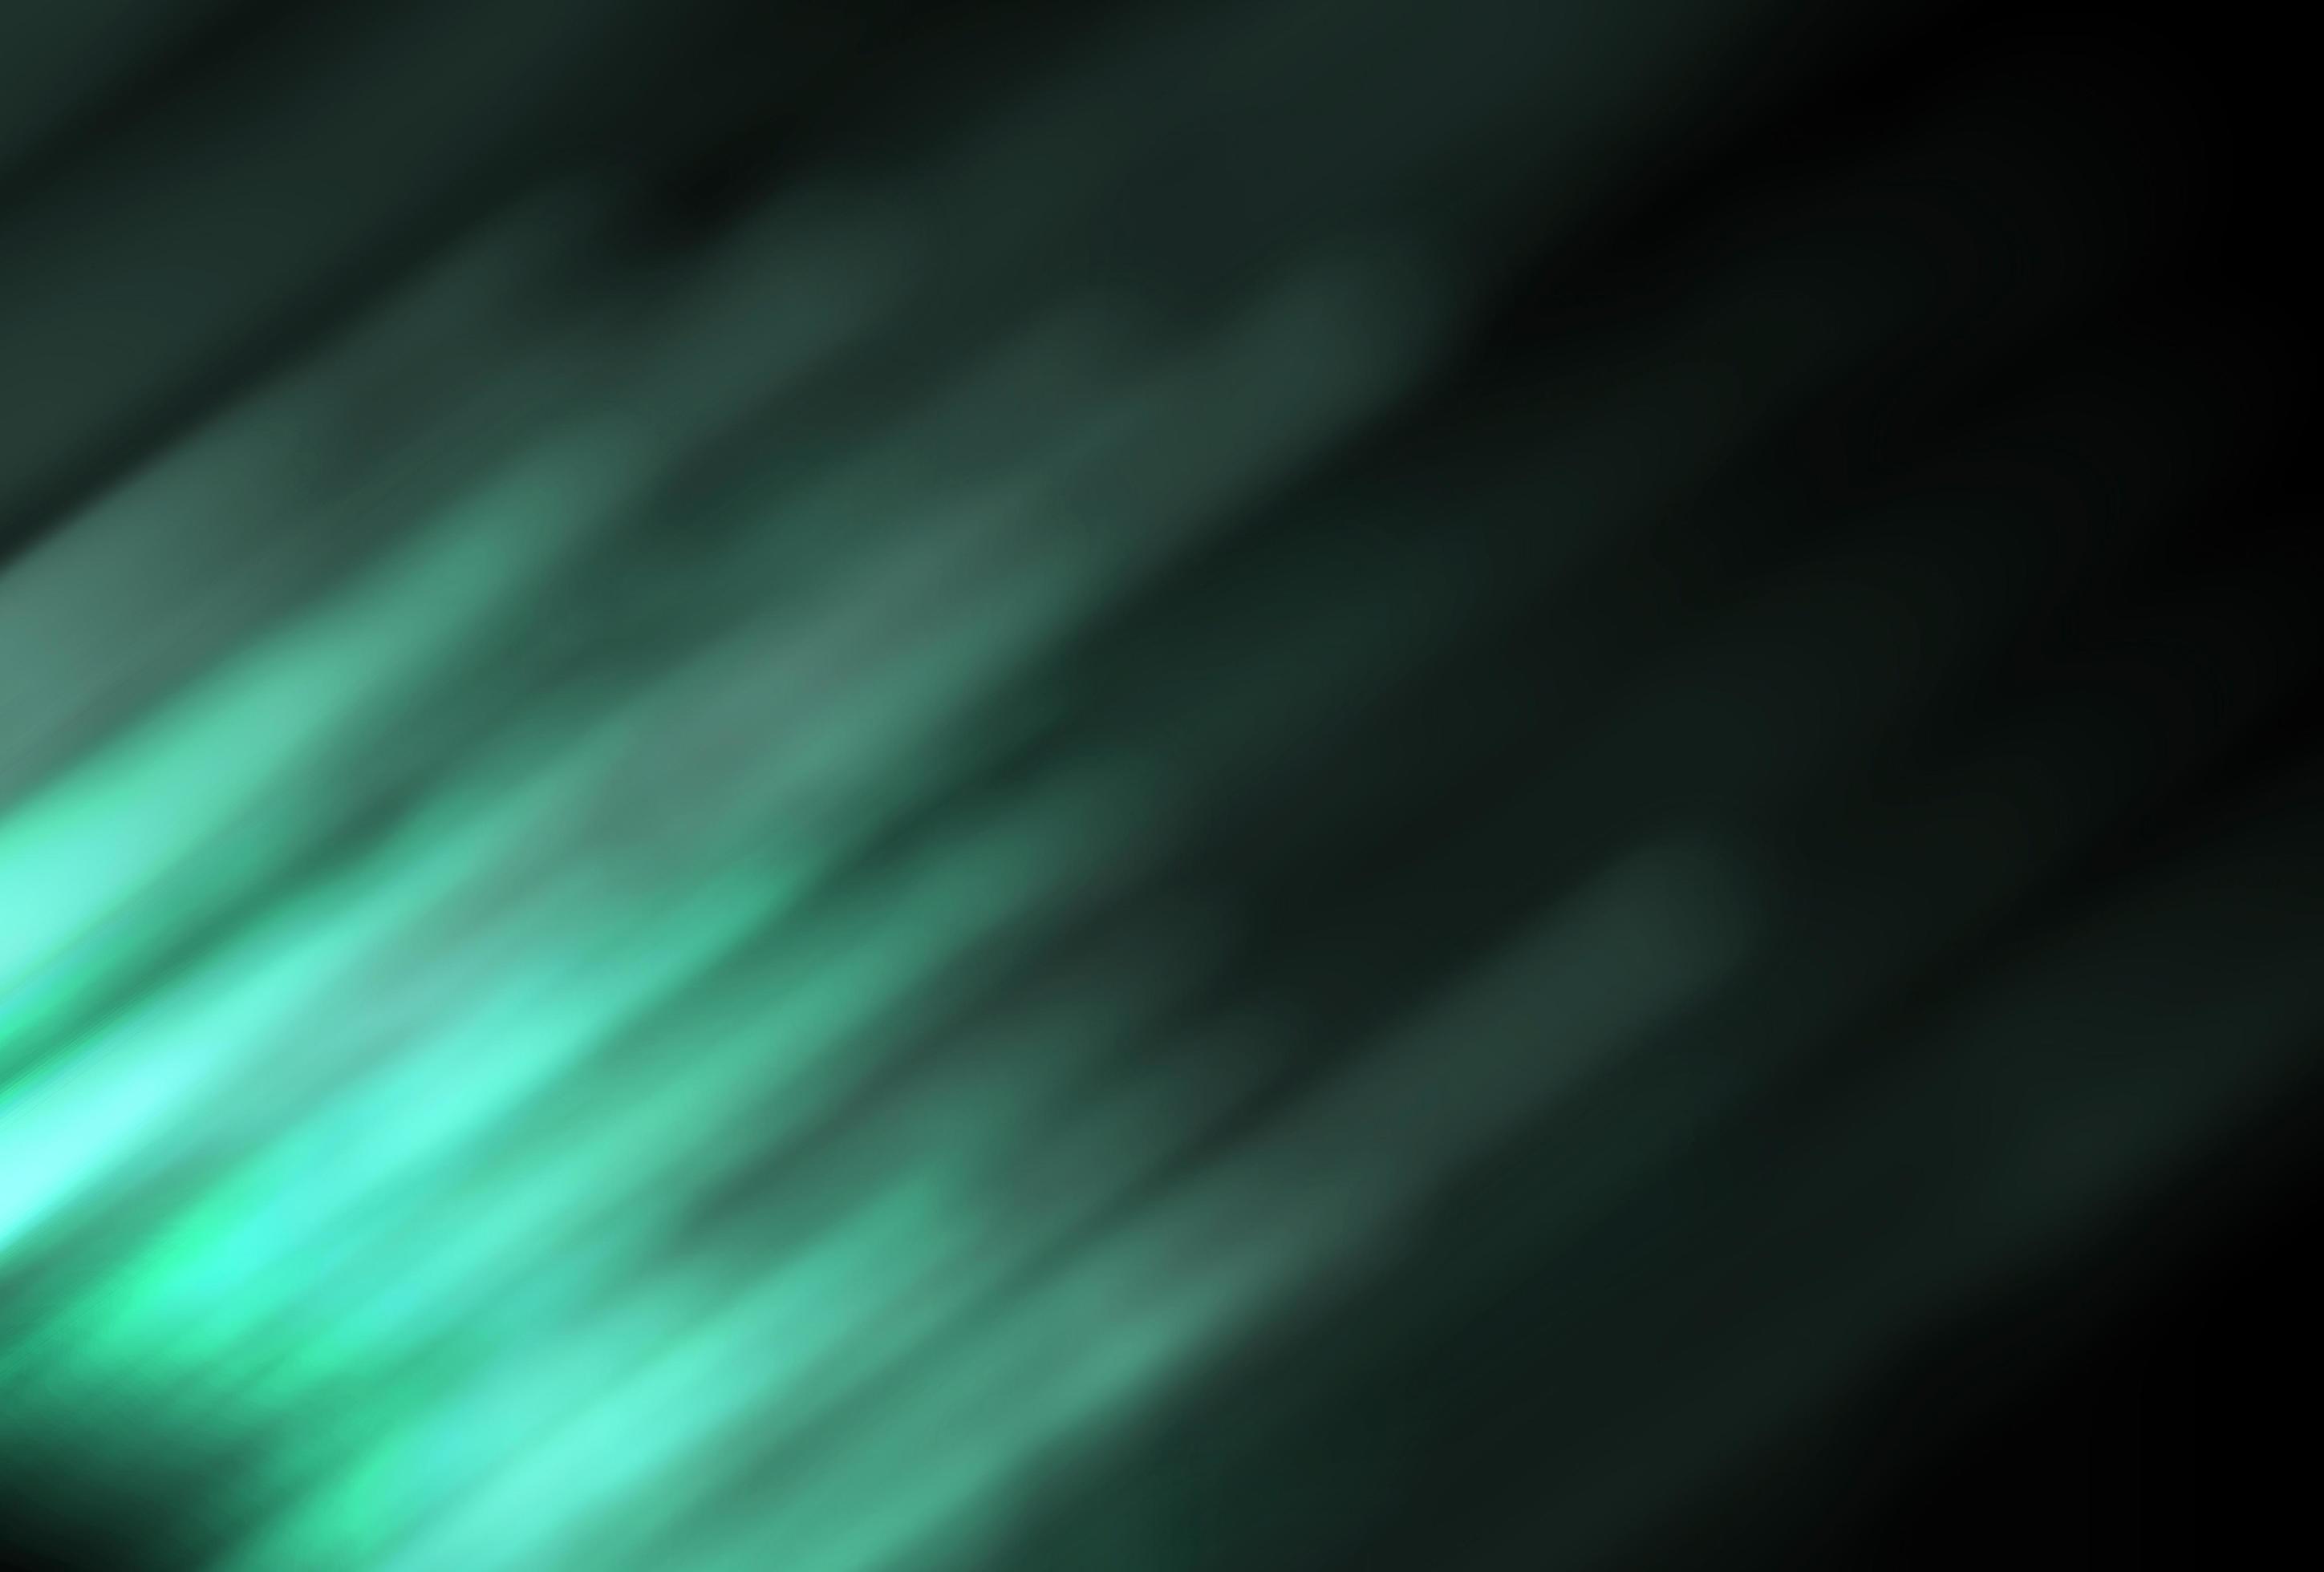 https://static.vecteezy.com/system/resources/previews/004/657/537/large_2x/abstract-sun-flare-light-green-overlay-pattern-with-abstract-rays-glowing-texture-on-dark-black-free-photo.jpg